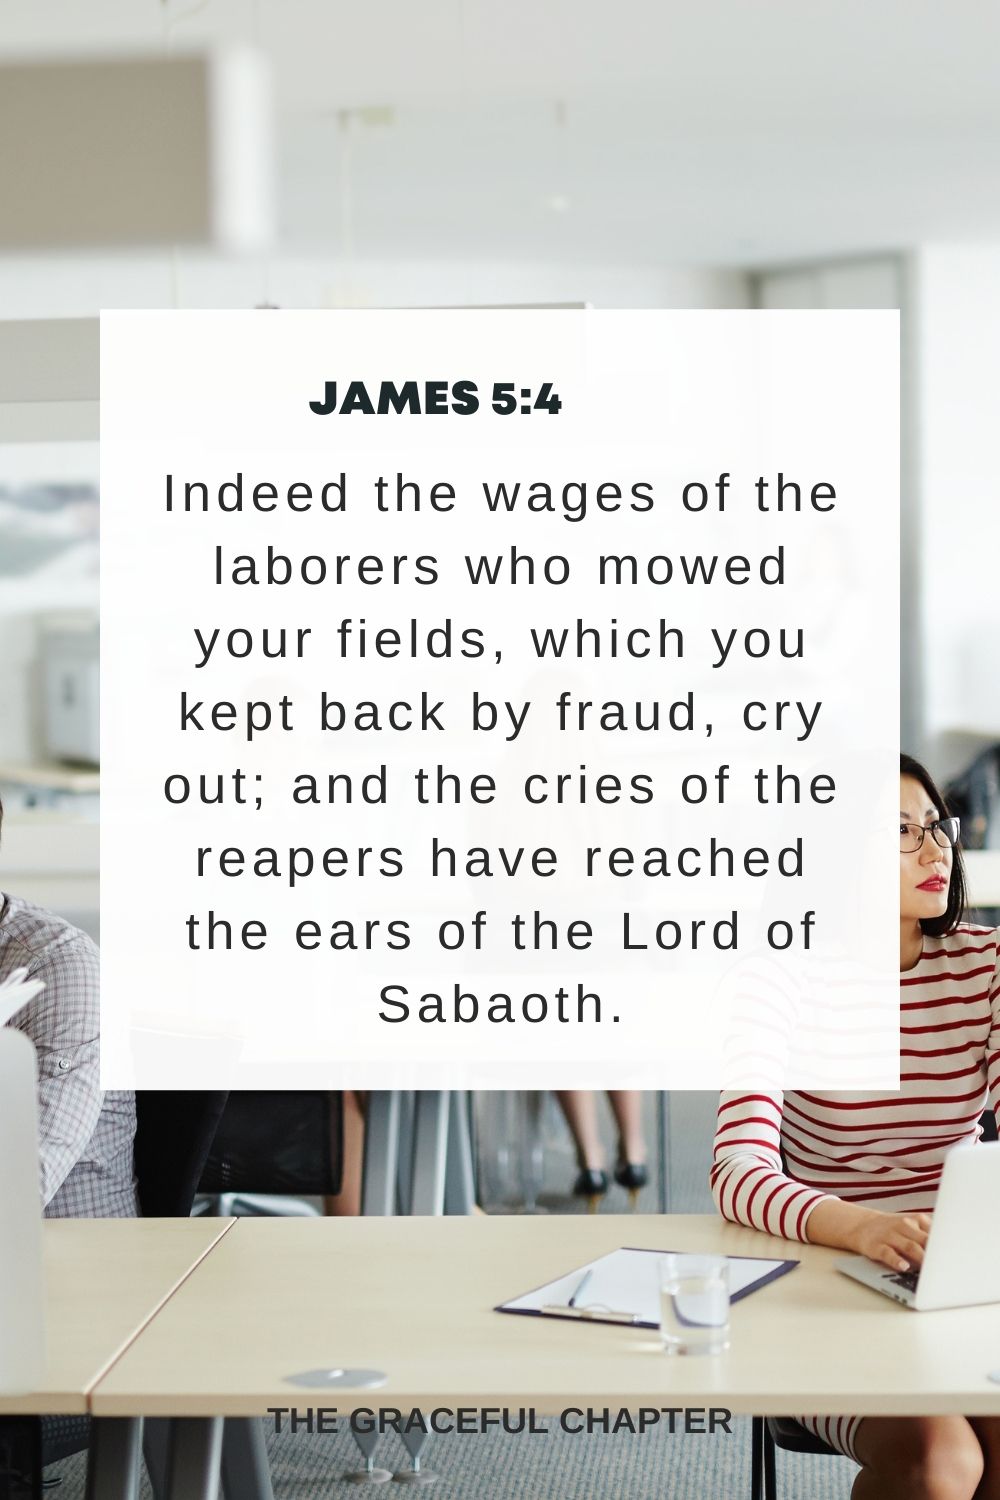 Indeed the wages of the laborers who mowed your fields, which you kept back by fraud, cry out; and the cries of the reapers have reached the ears of the Lord of Sabaoth. James 5:4